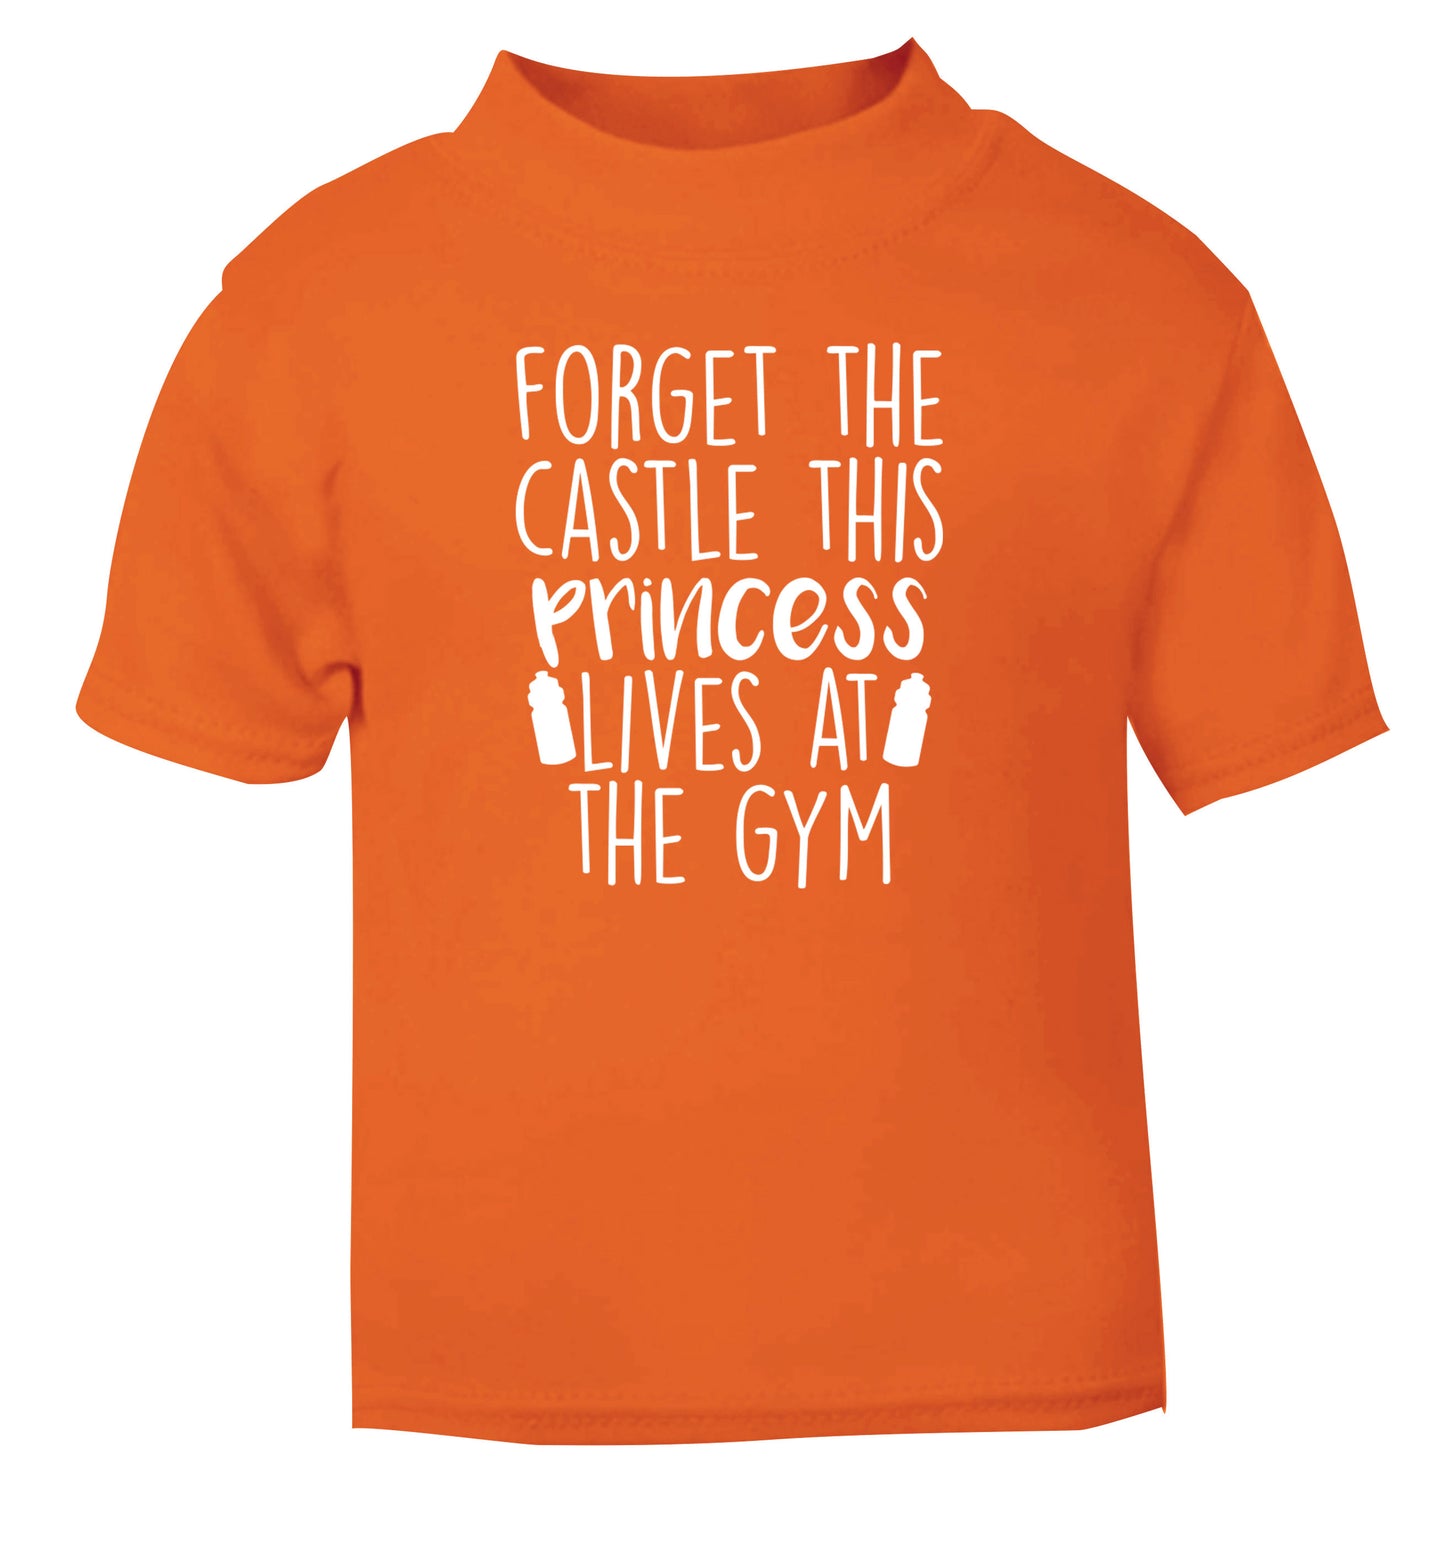 Forget the castle this princess lives at the gym orange Baby Toddler Tshirt 2 Years